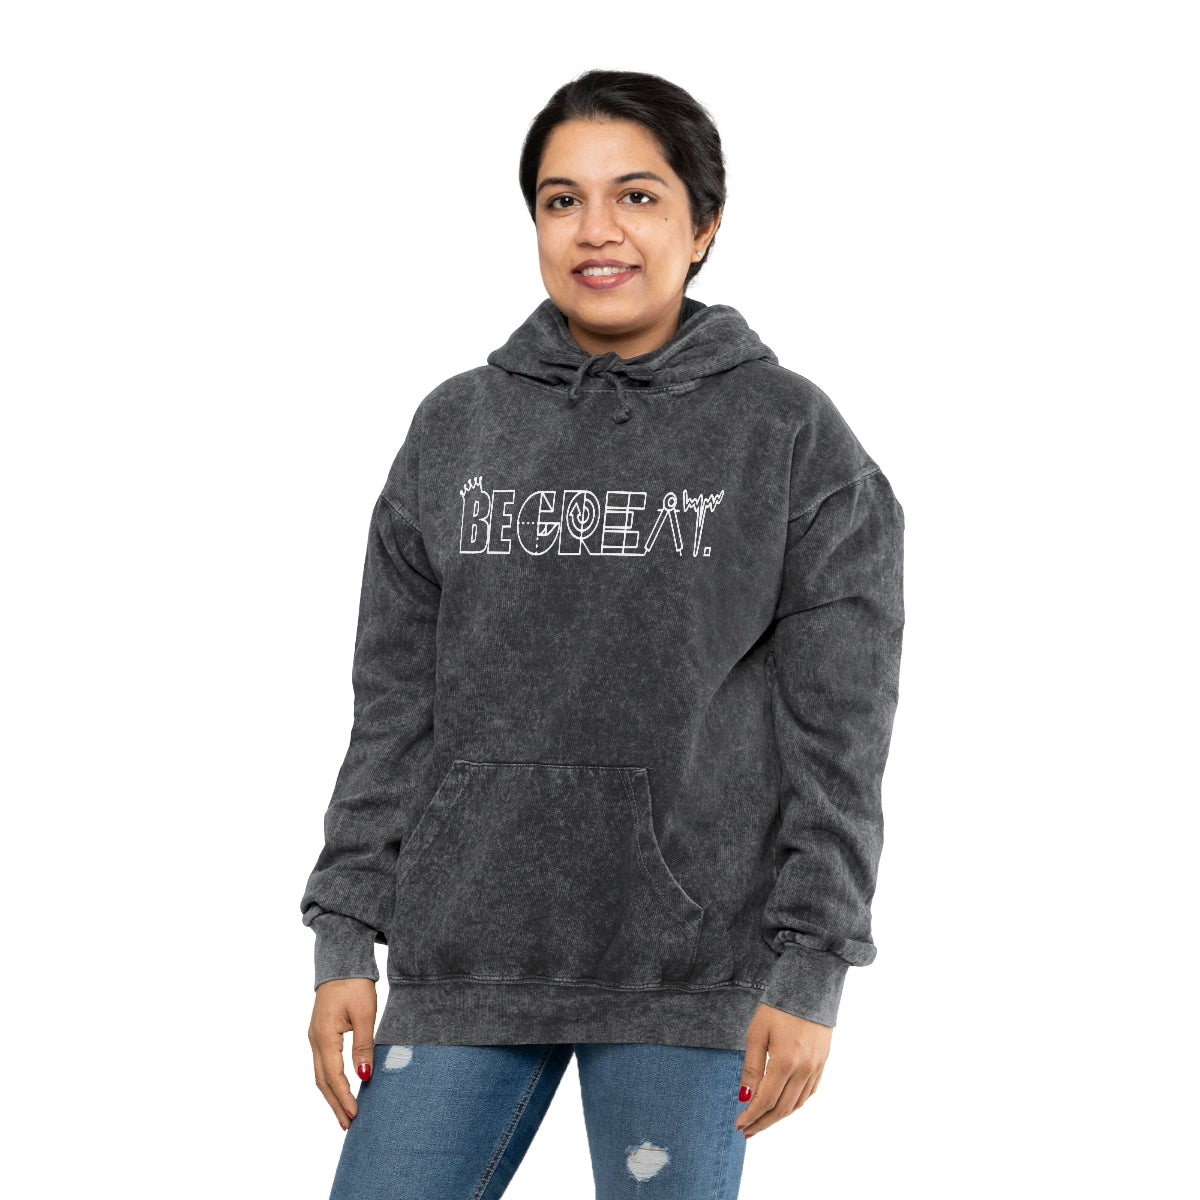 "BE GREAT" (architecture) Unisex Mineral Wash Hoodie